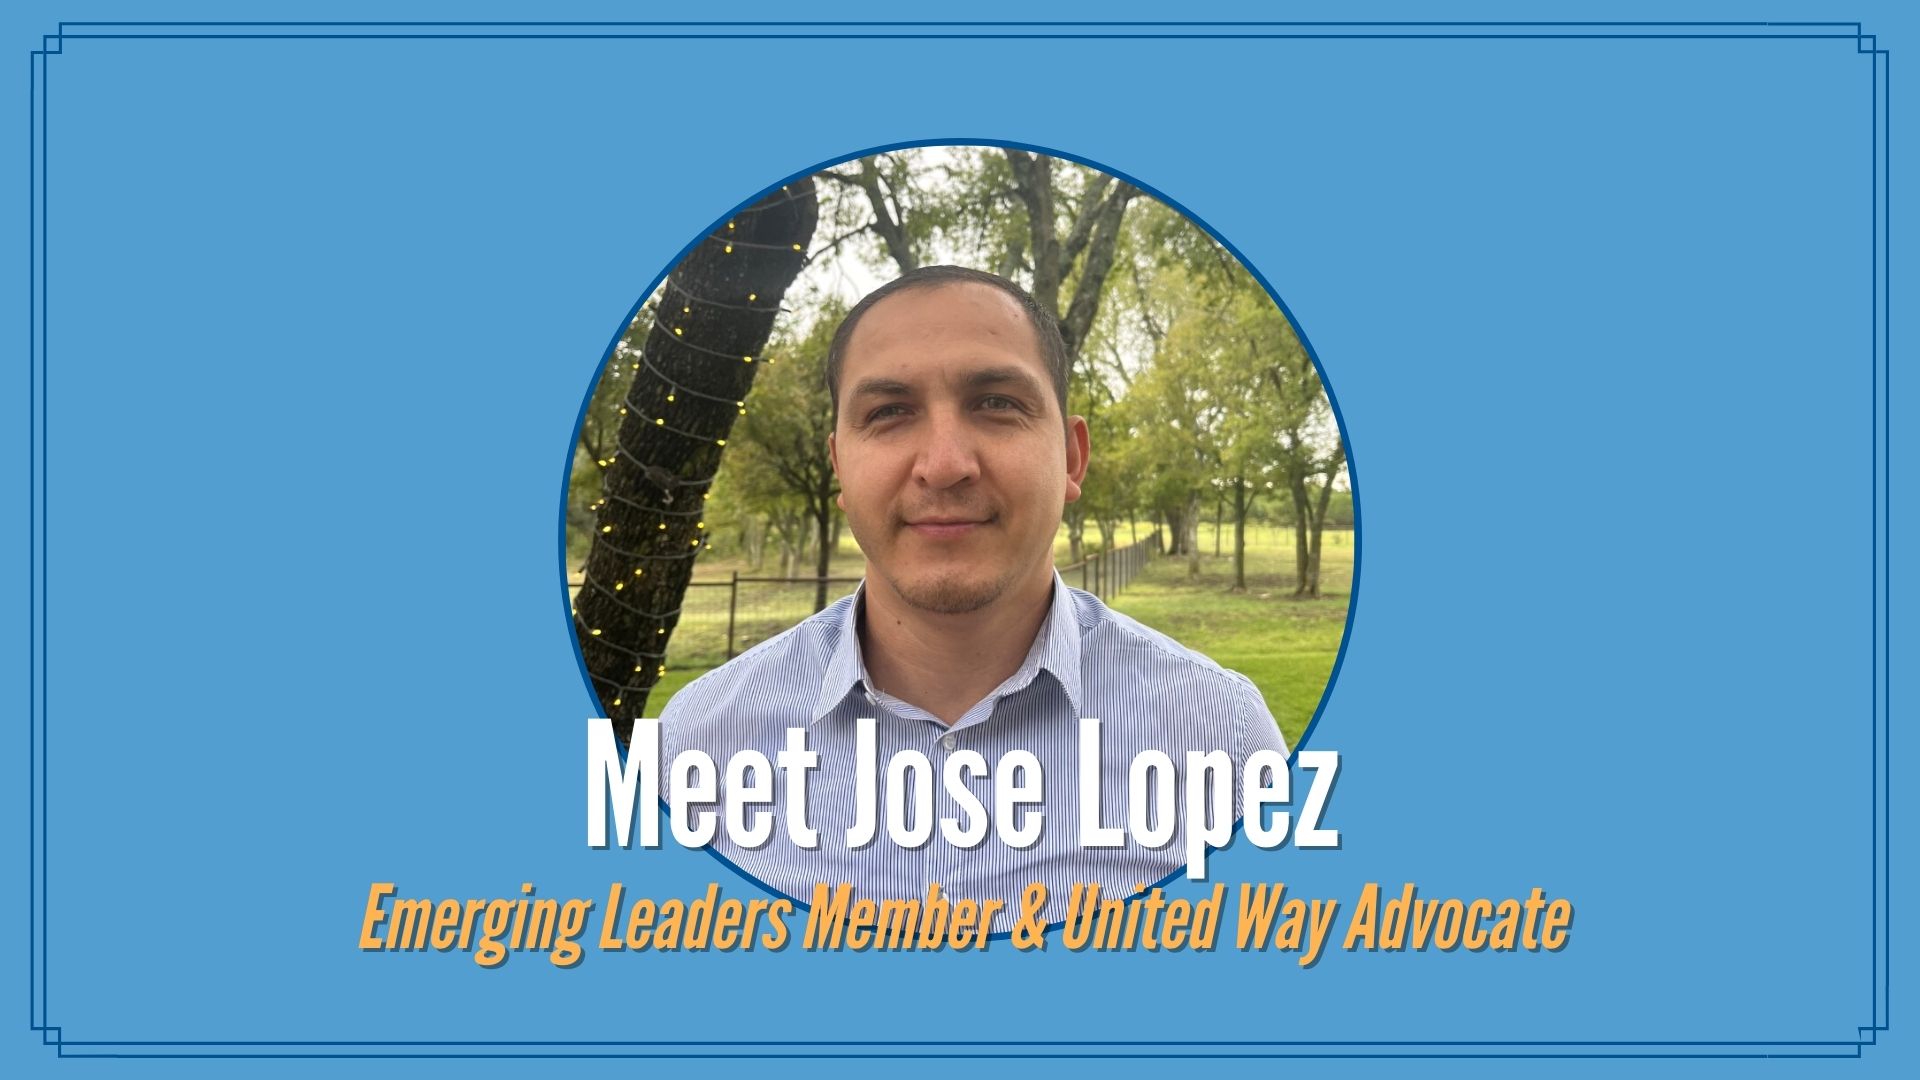 Emerging Leaders member Jose Lopez: “I Live United because I want to make a difference.”